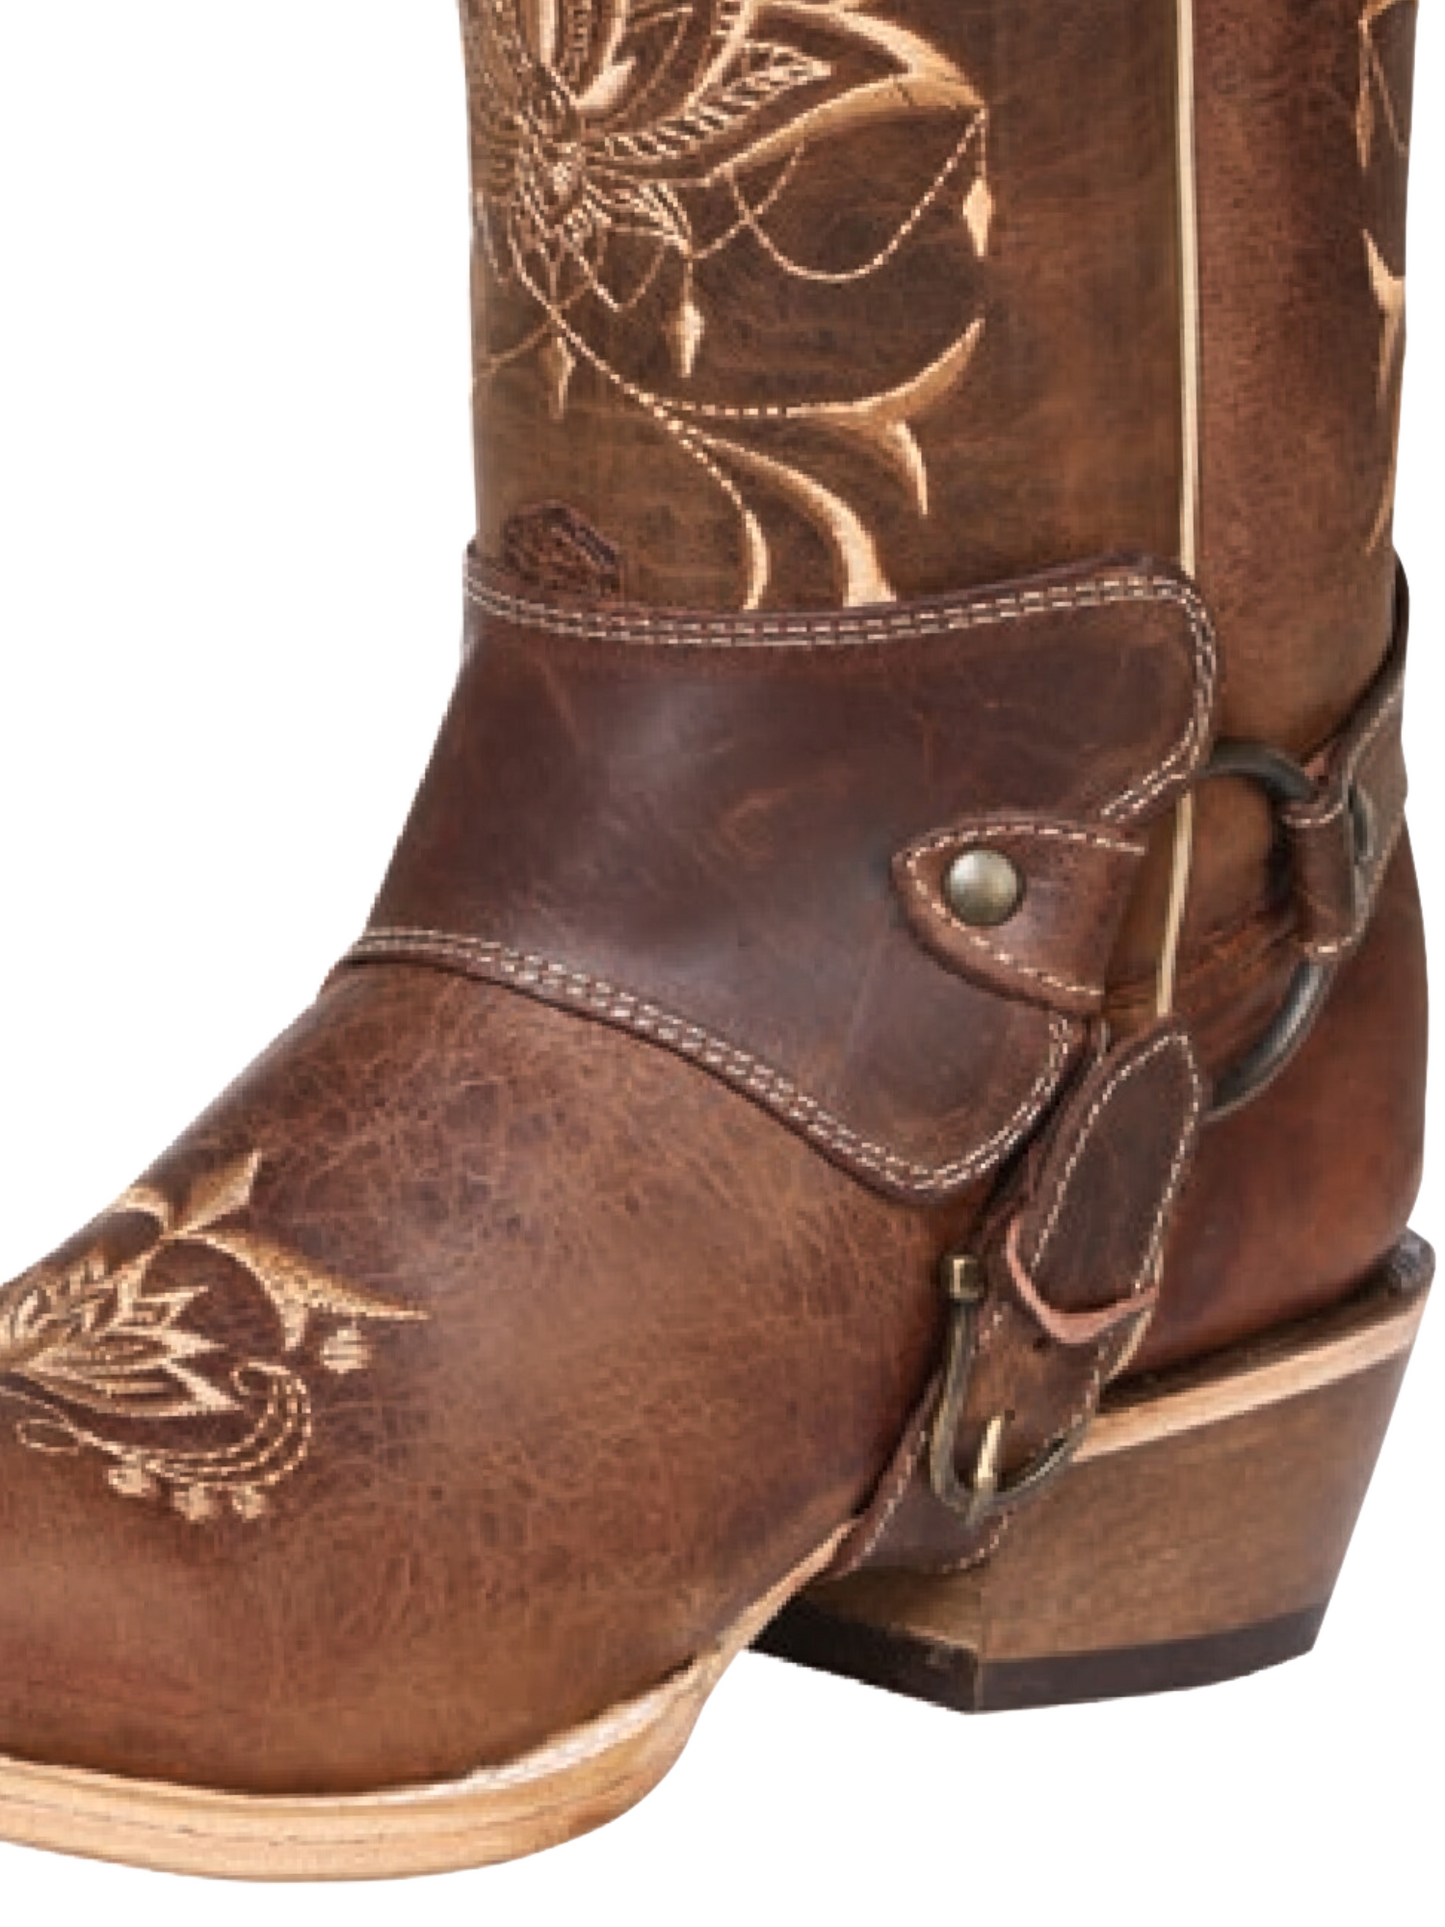 Rodeo Harness Cowboy Boots with Embroidered Genuine Leather Tube for Women 'El General' - ID: 41907